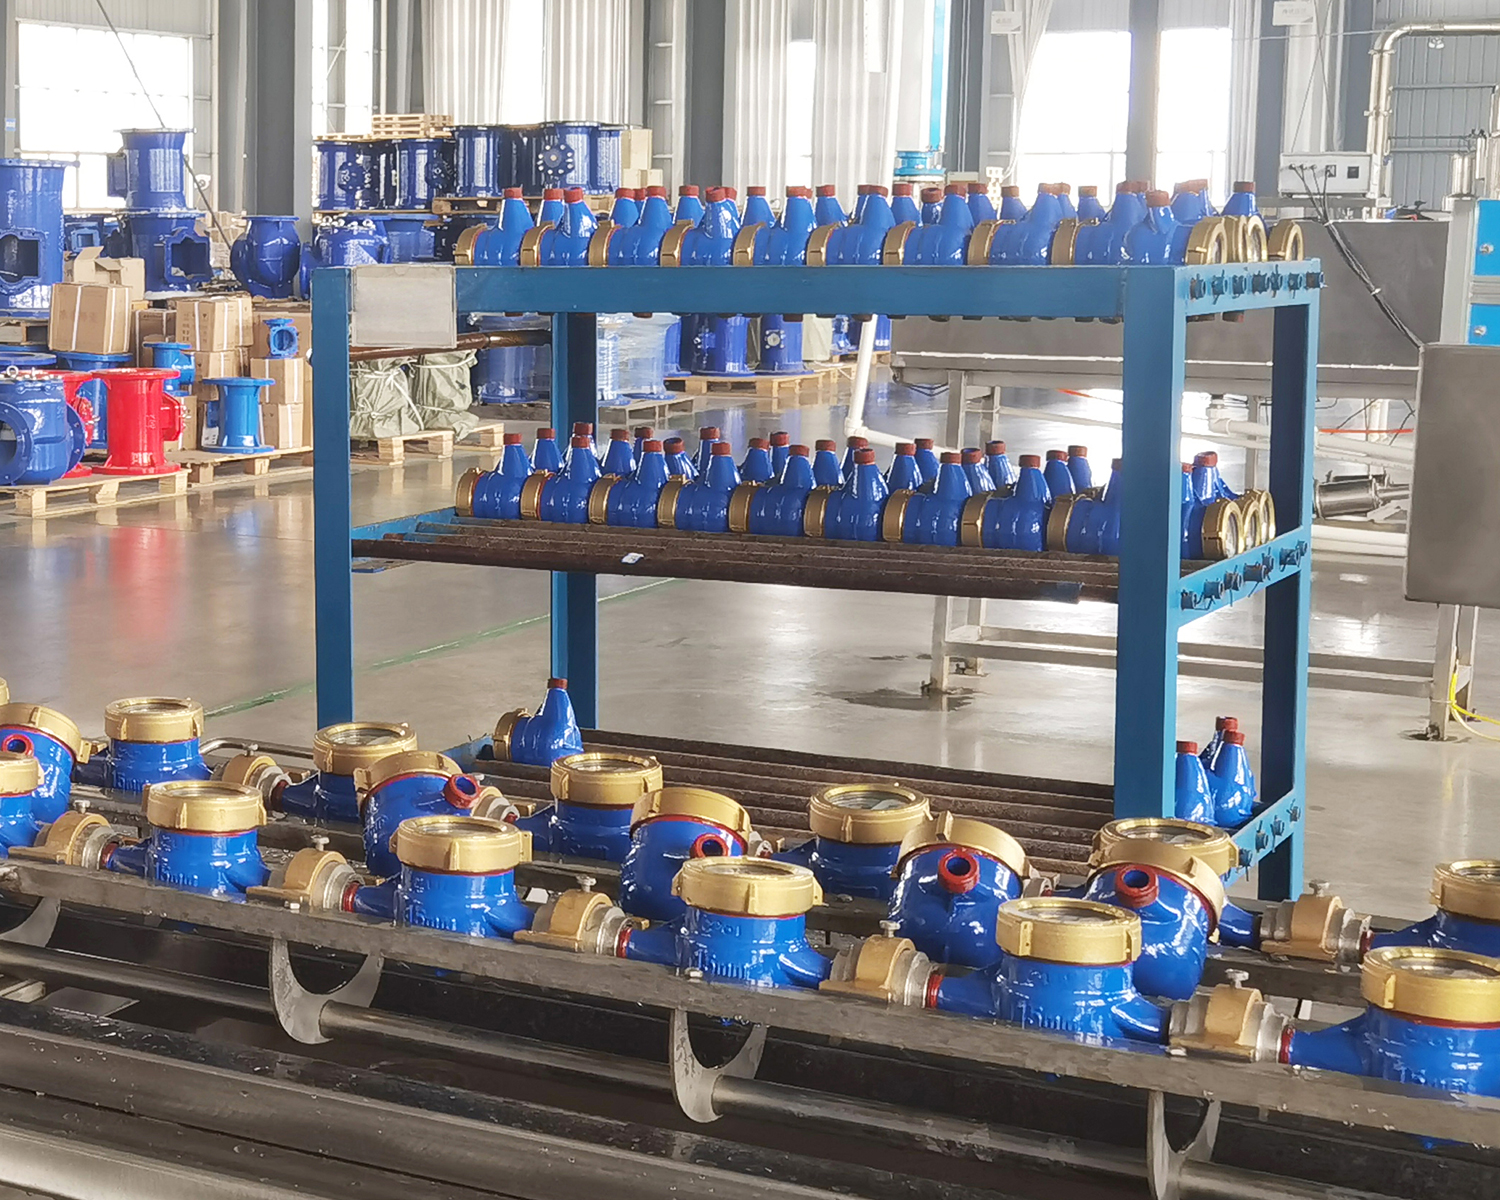 S.H.Meters ensures quality assurance: recently conducted a comprehensive inspection of multi jet water meters and ultrasonic water meters in the factory